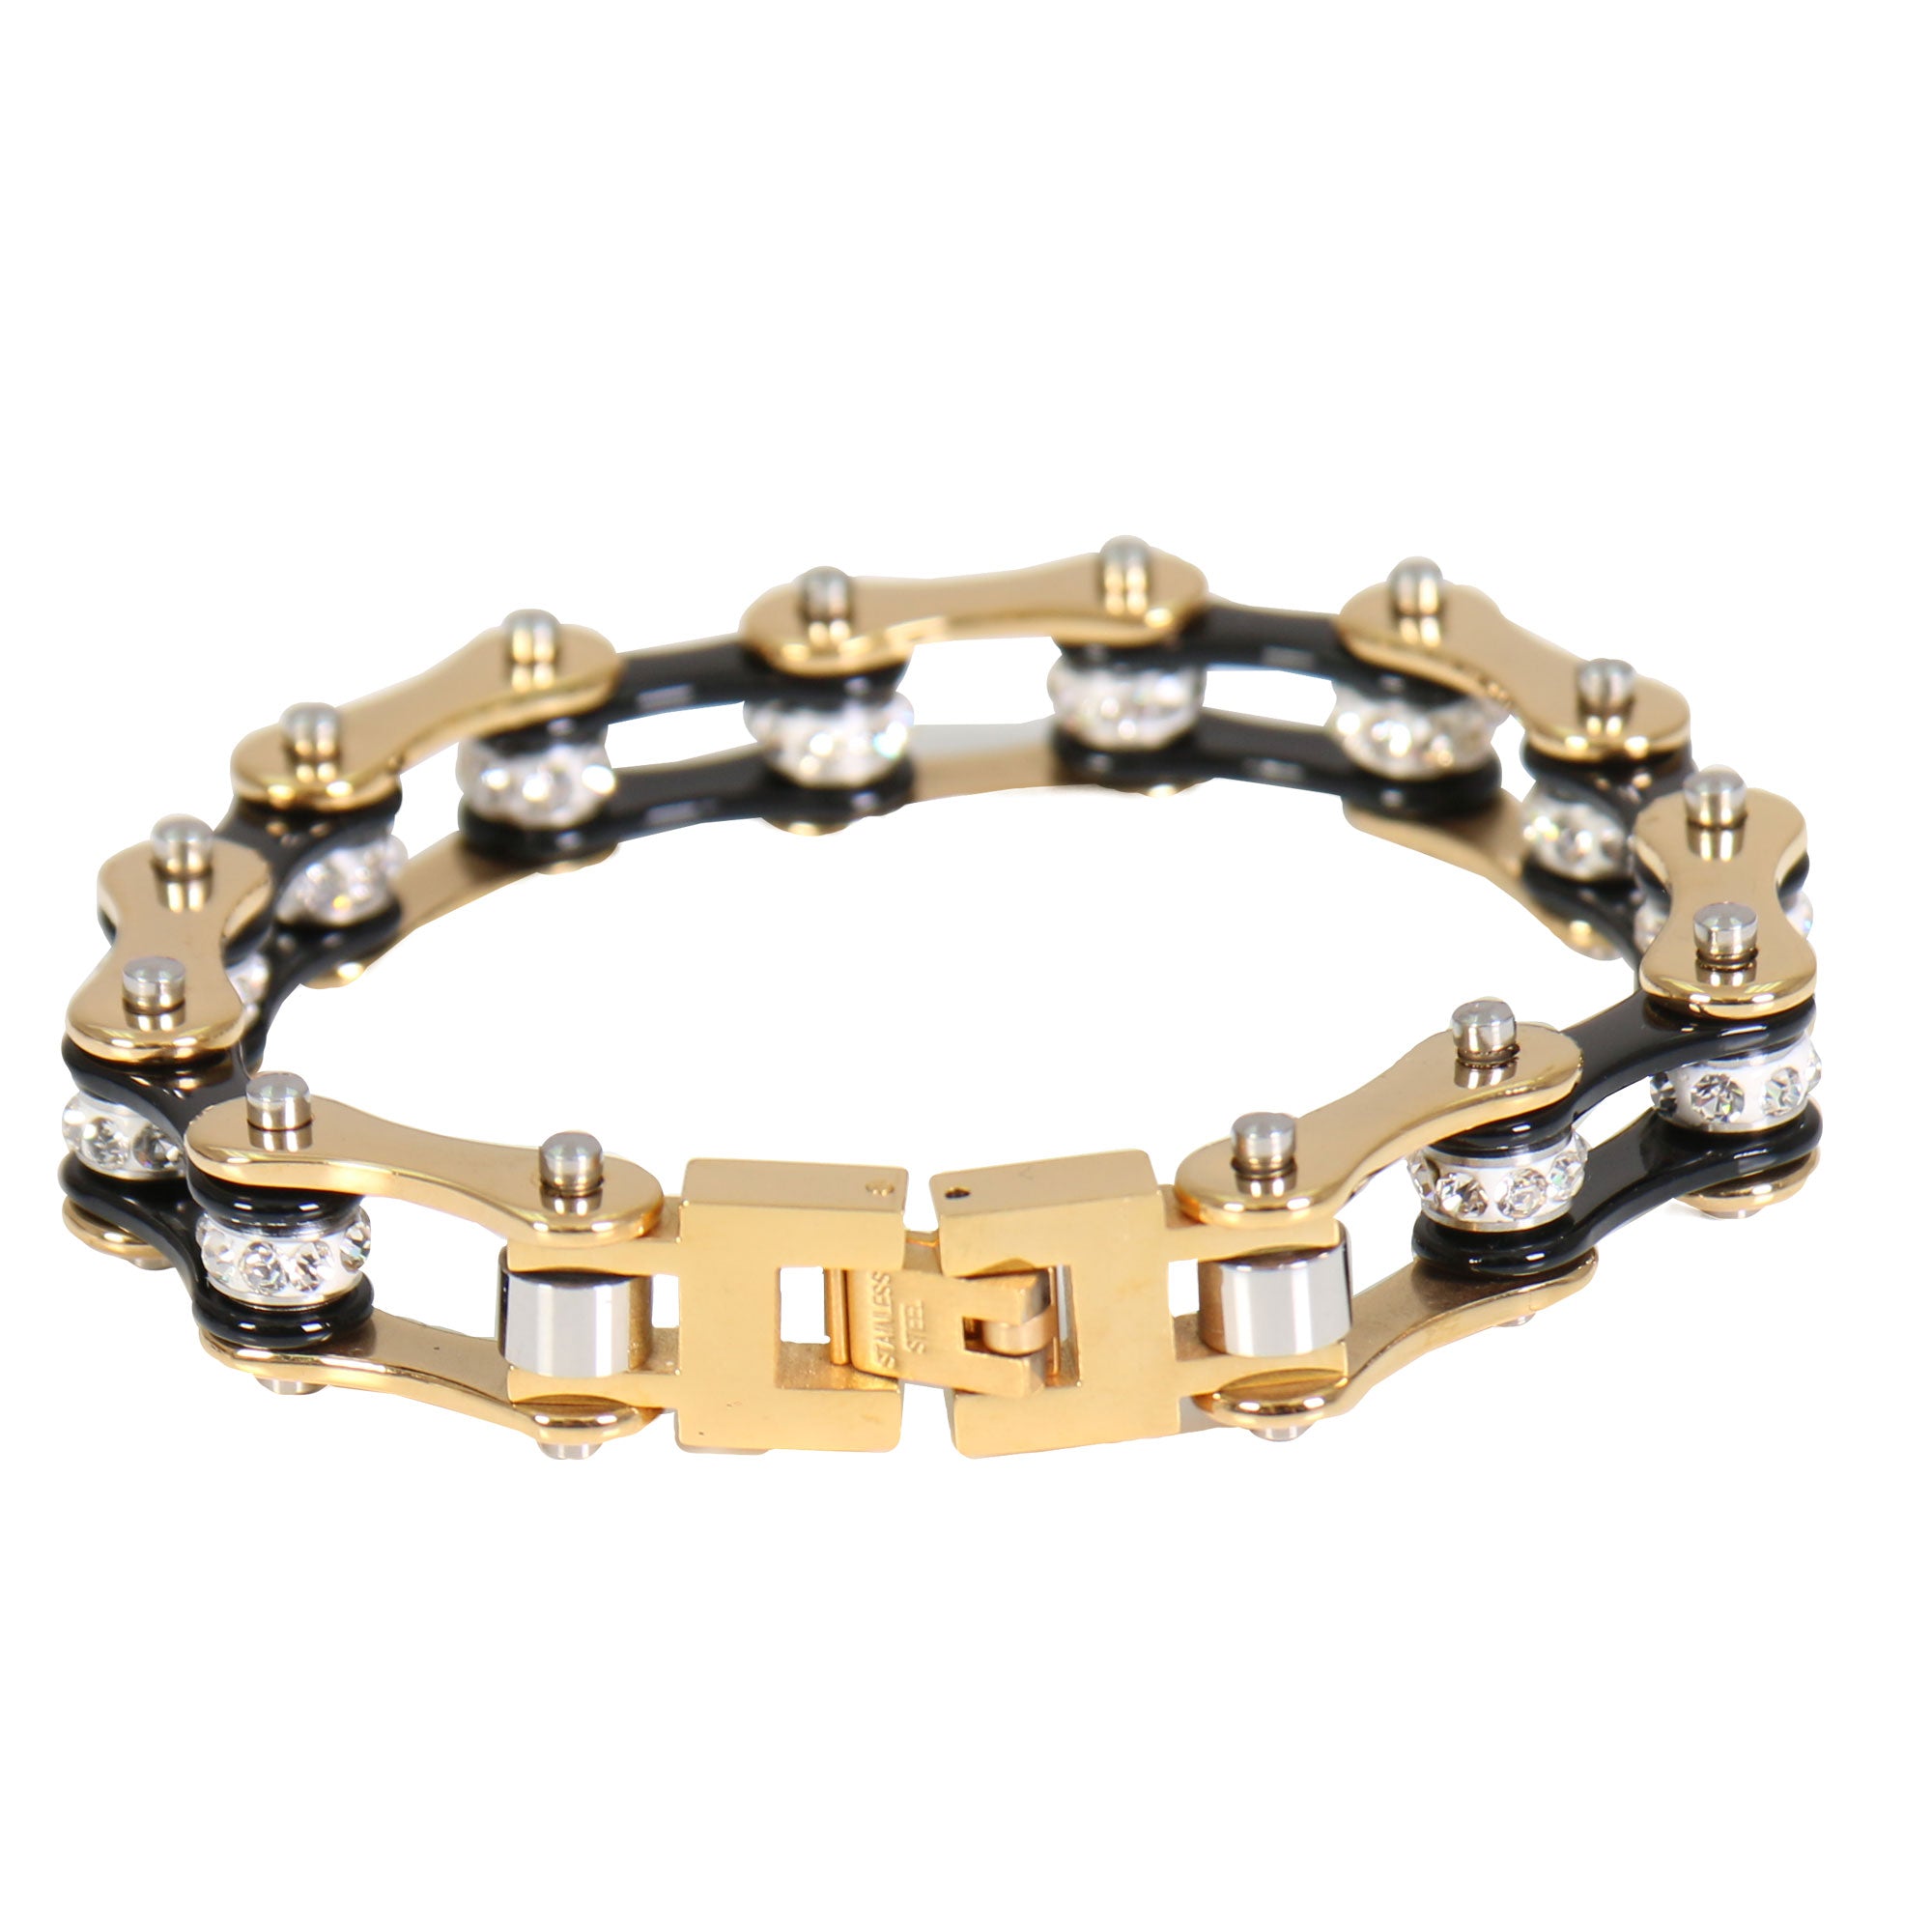 Hot Leathers JWB3108 Black and Gold Motorcycle Chain Stainless Steel Bracelets